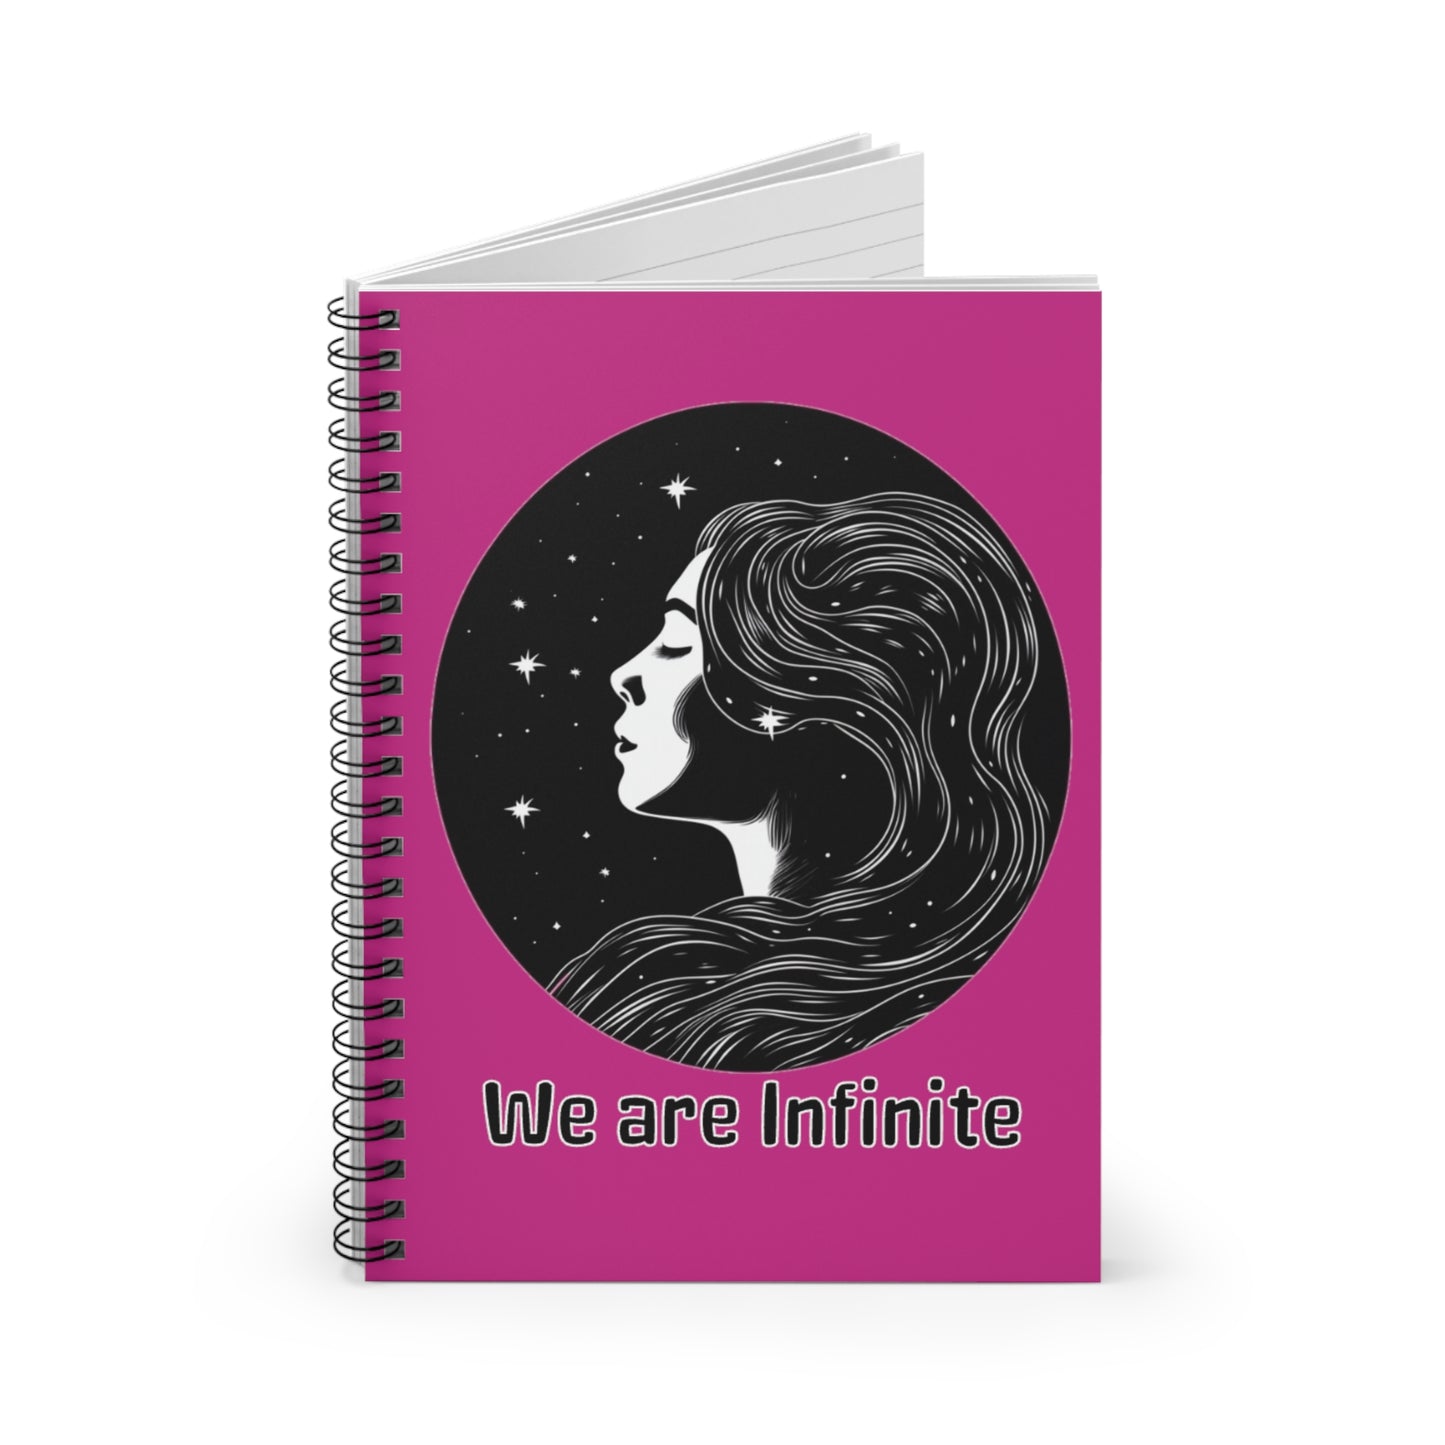 We are Infinite | Spiral Notebook - Ruled Line